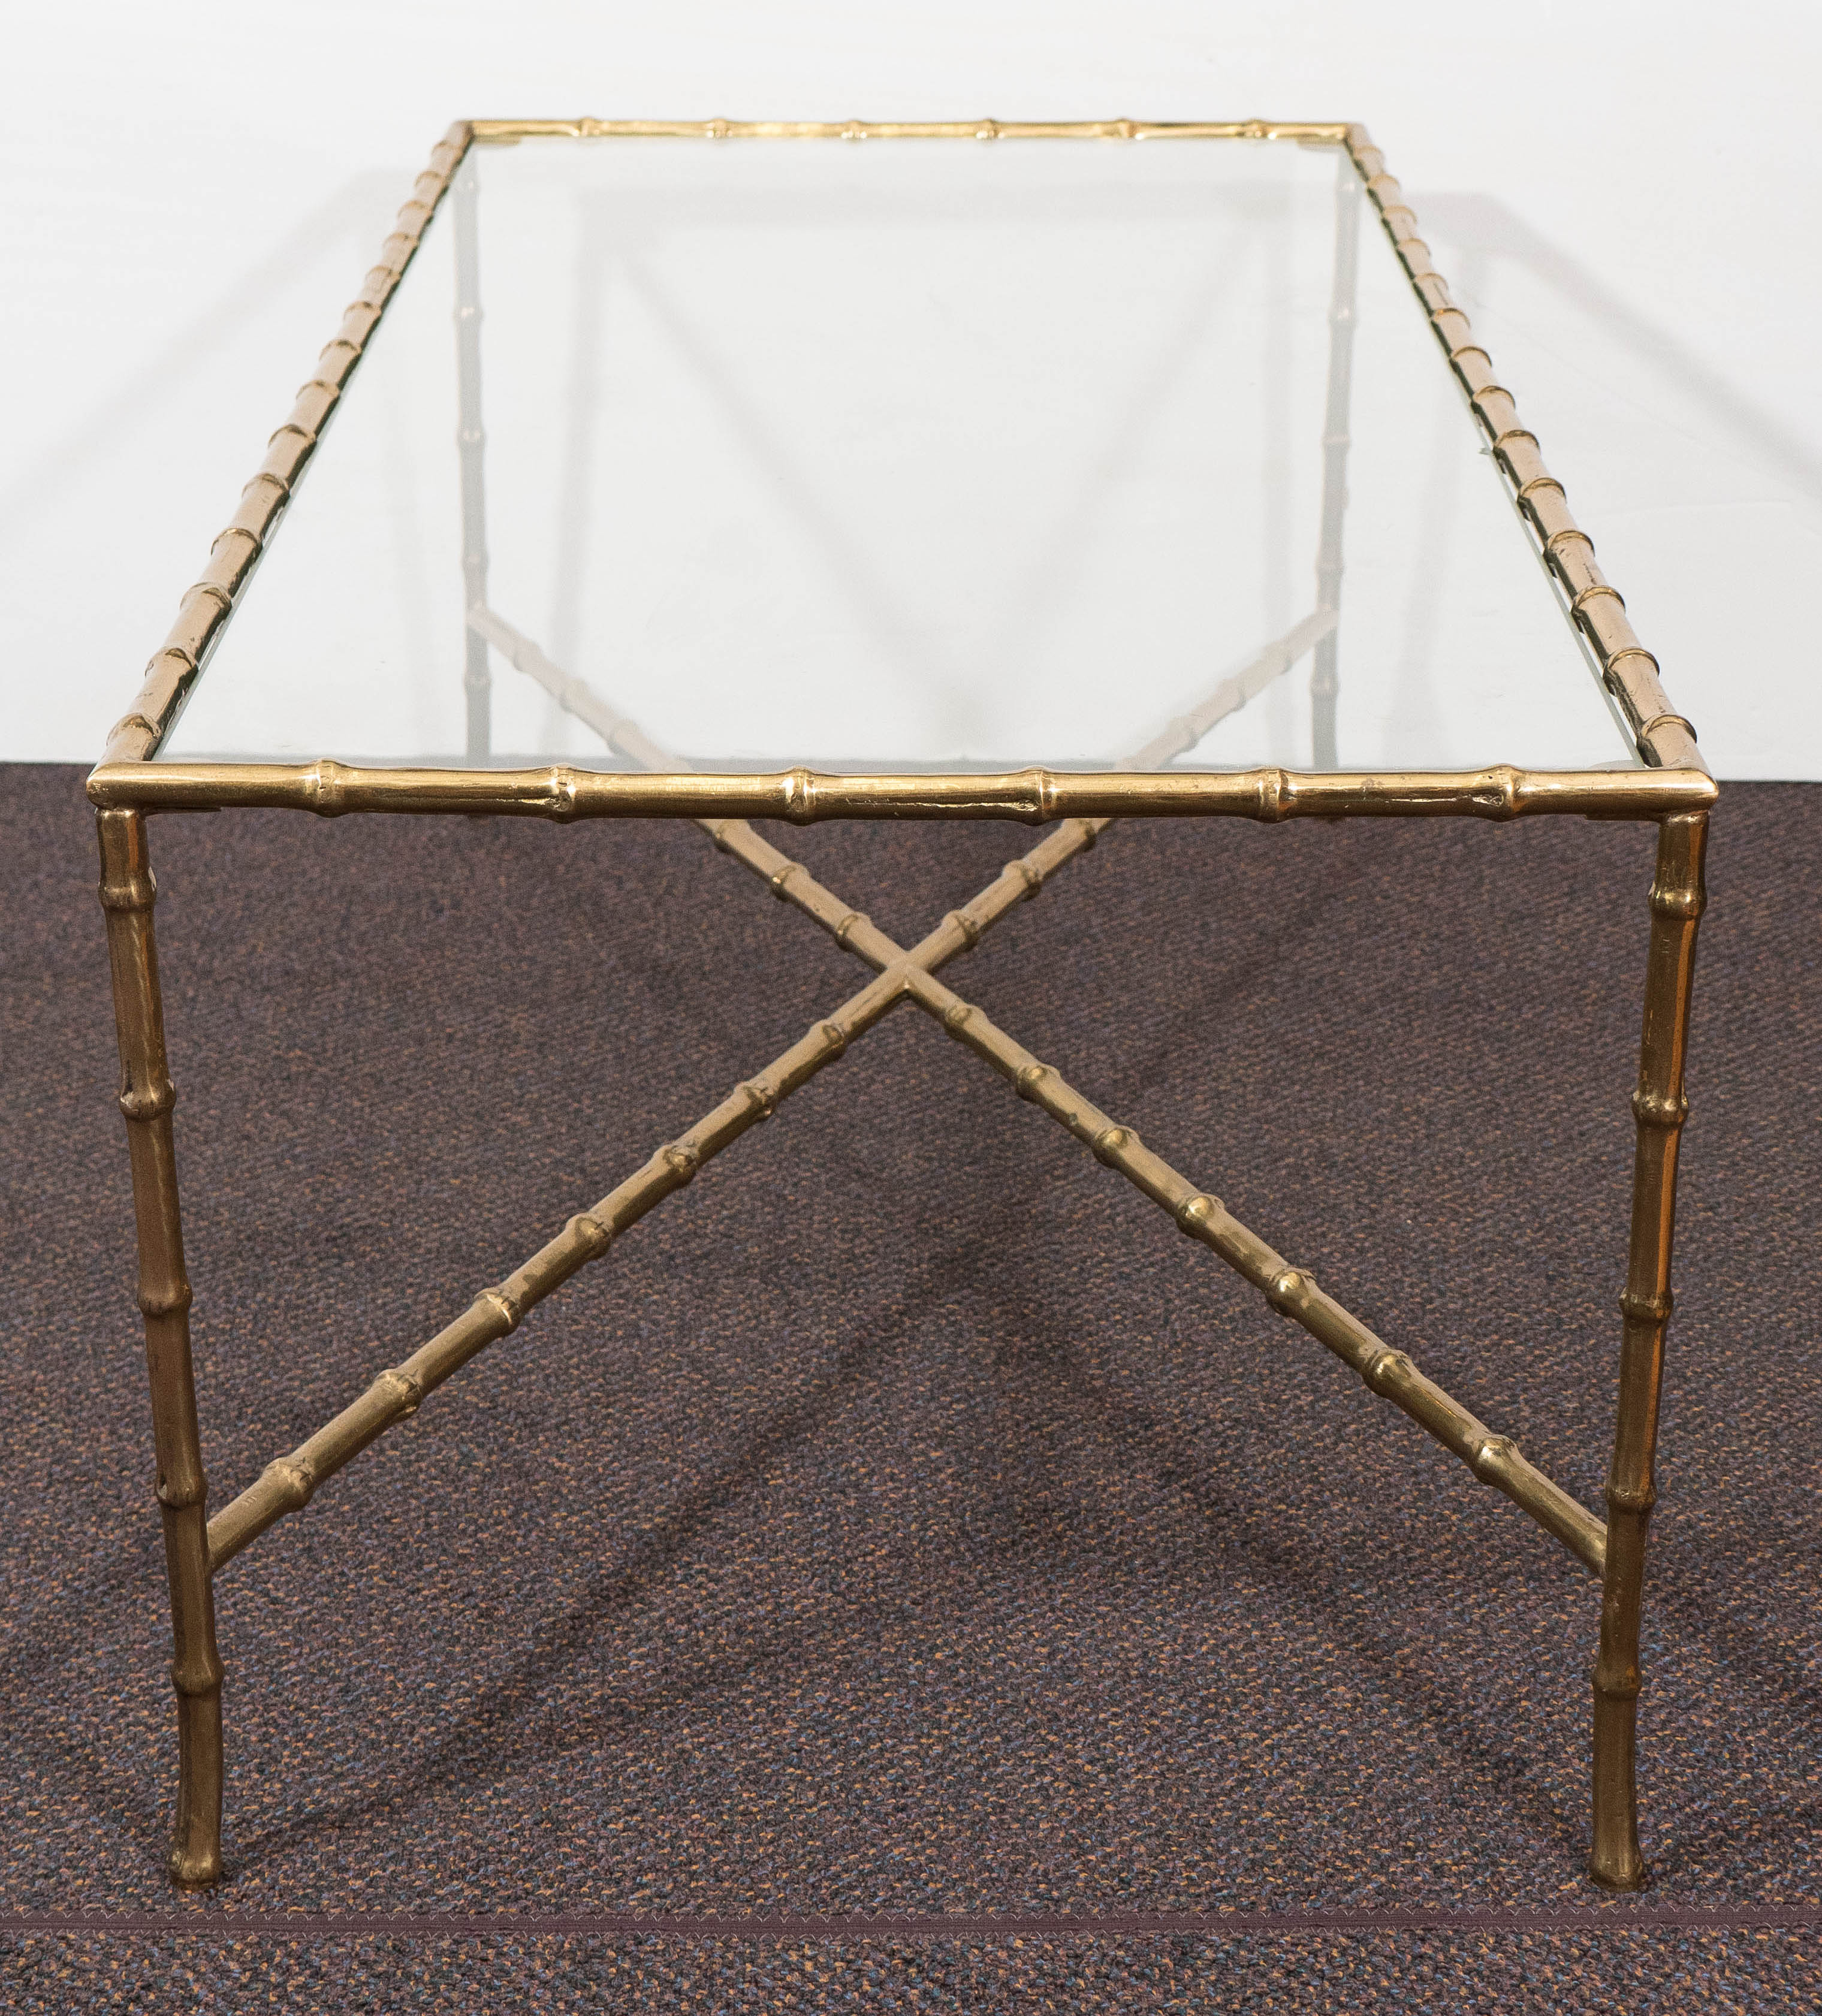 Chinoiserie Mid-Century Brass Faux Bamboo Coffee Table by Maison Bagues